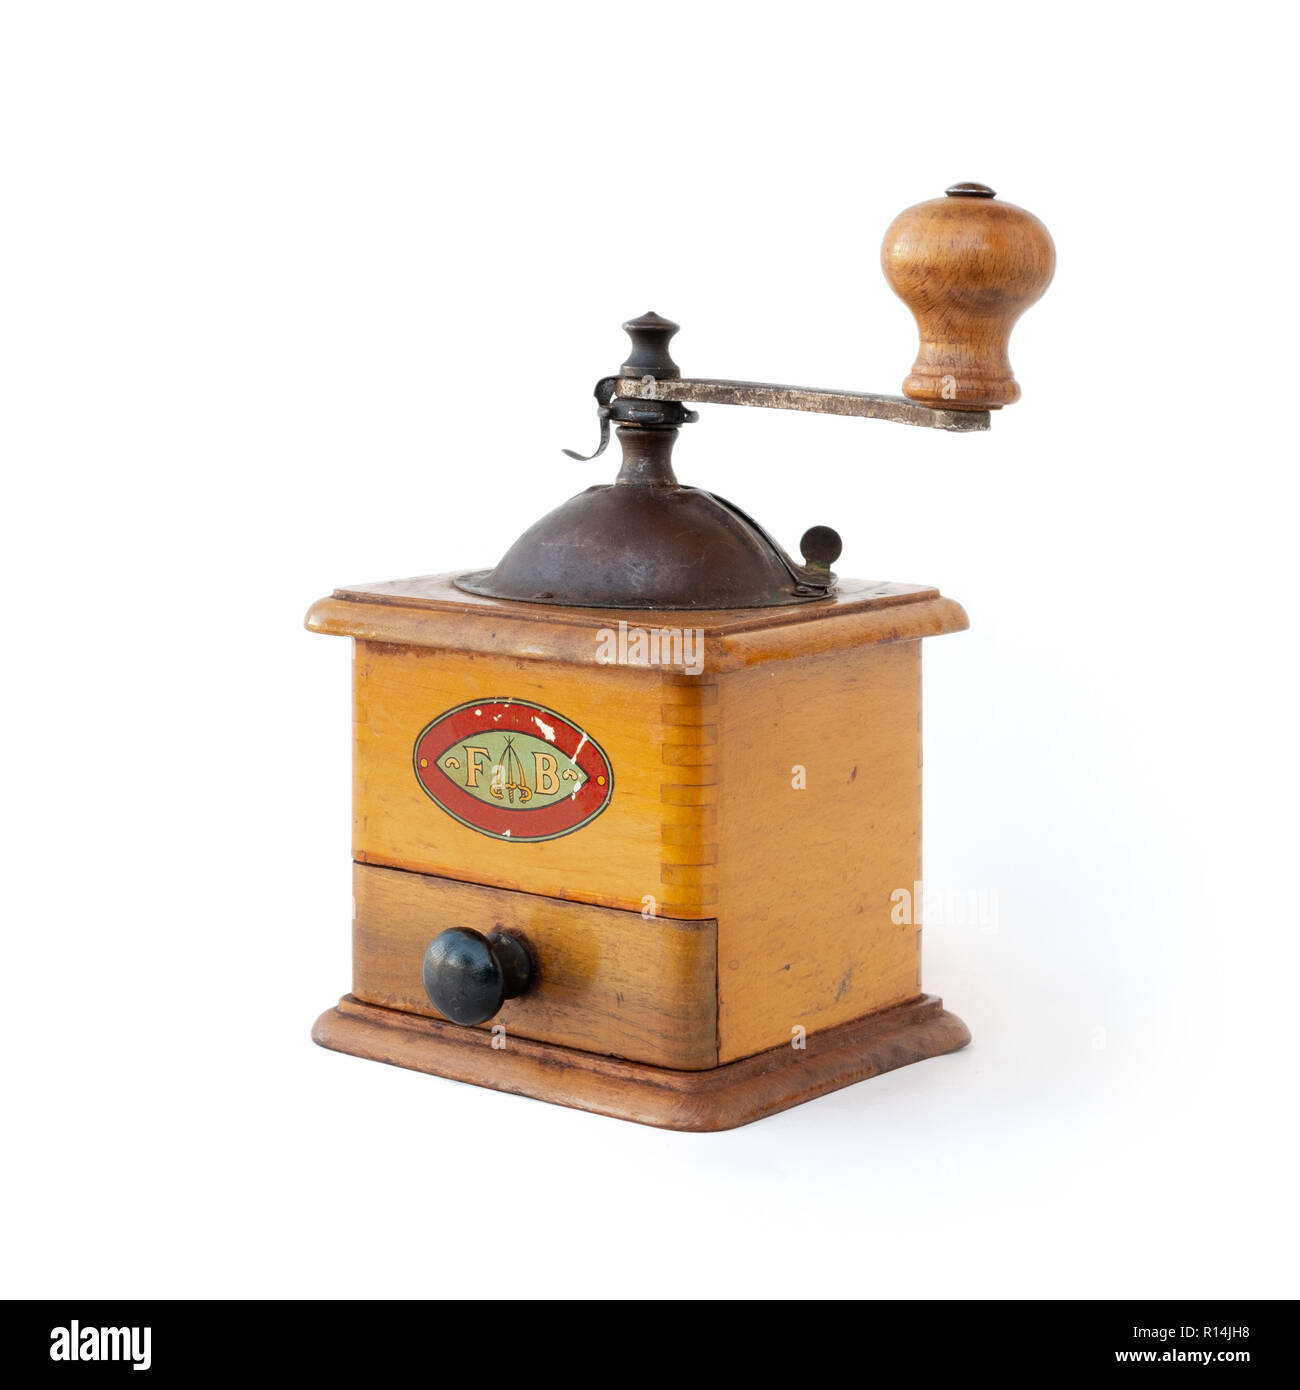 Old Italian traditional and manual coffee grinder Stock Photo - Alamy